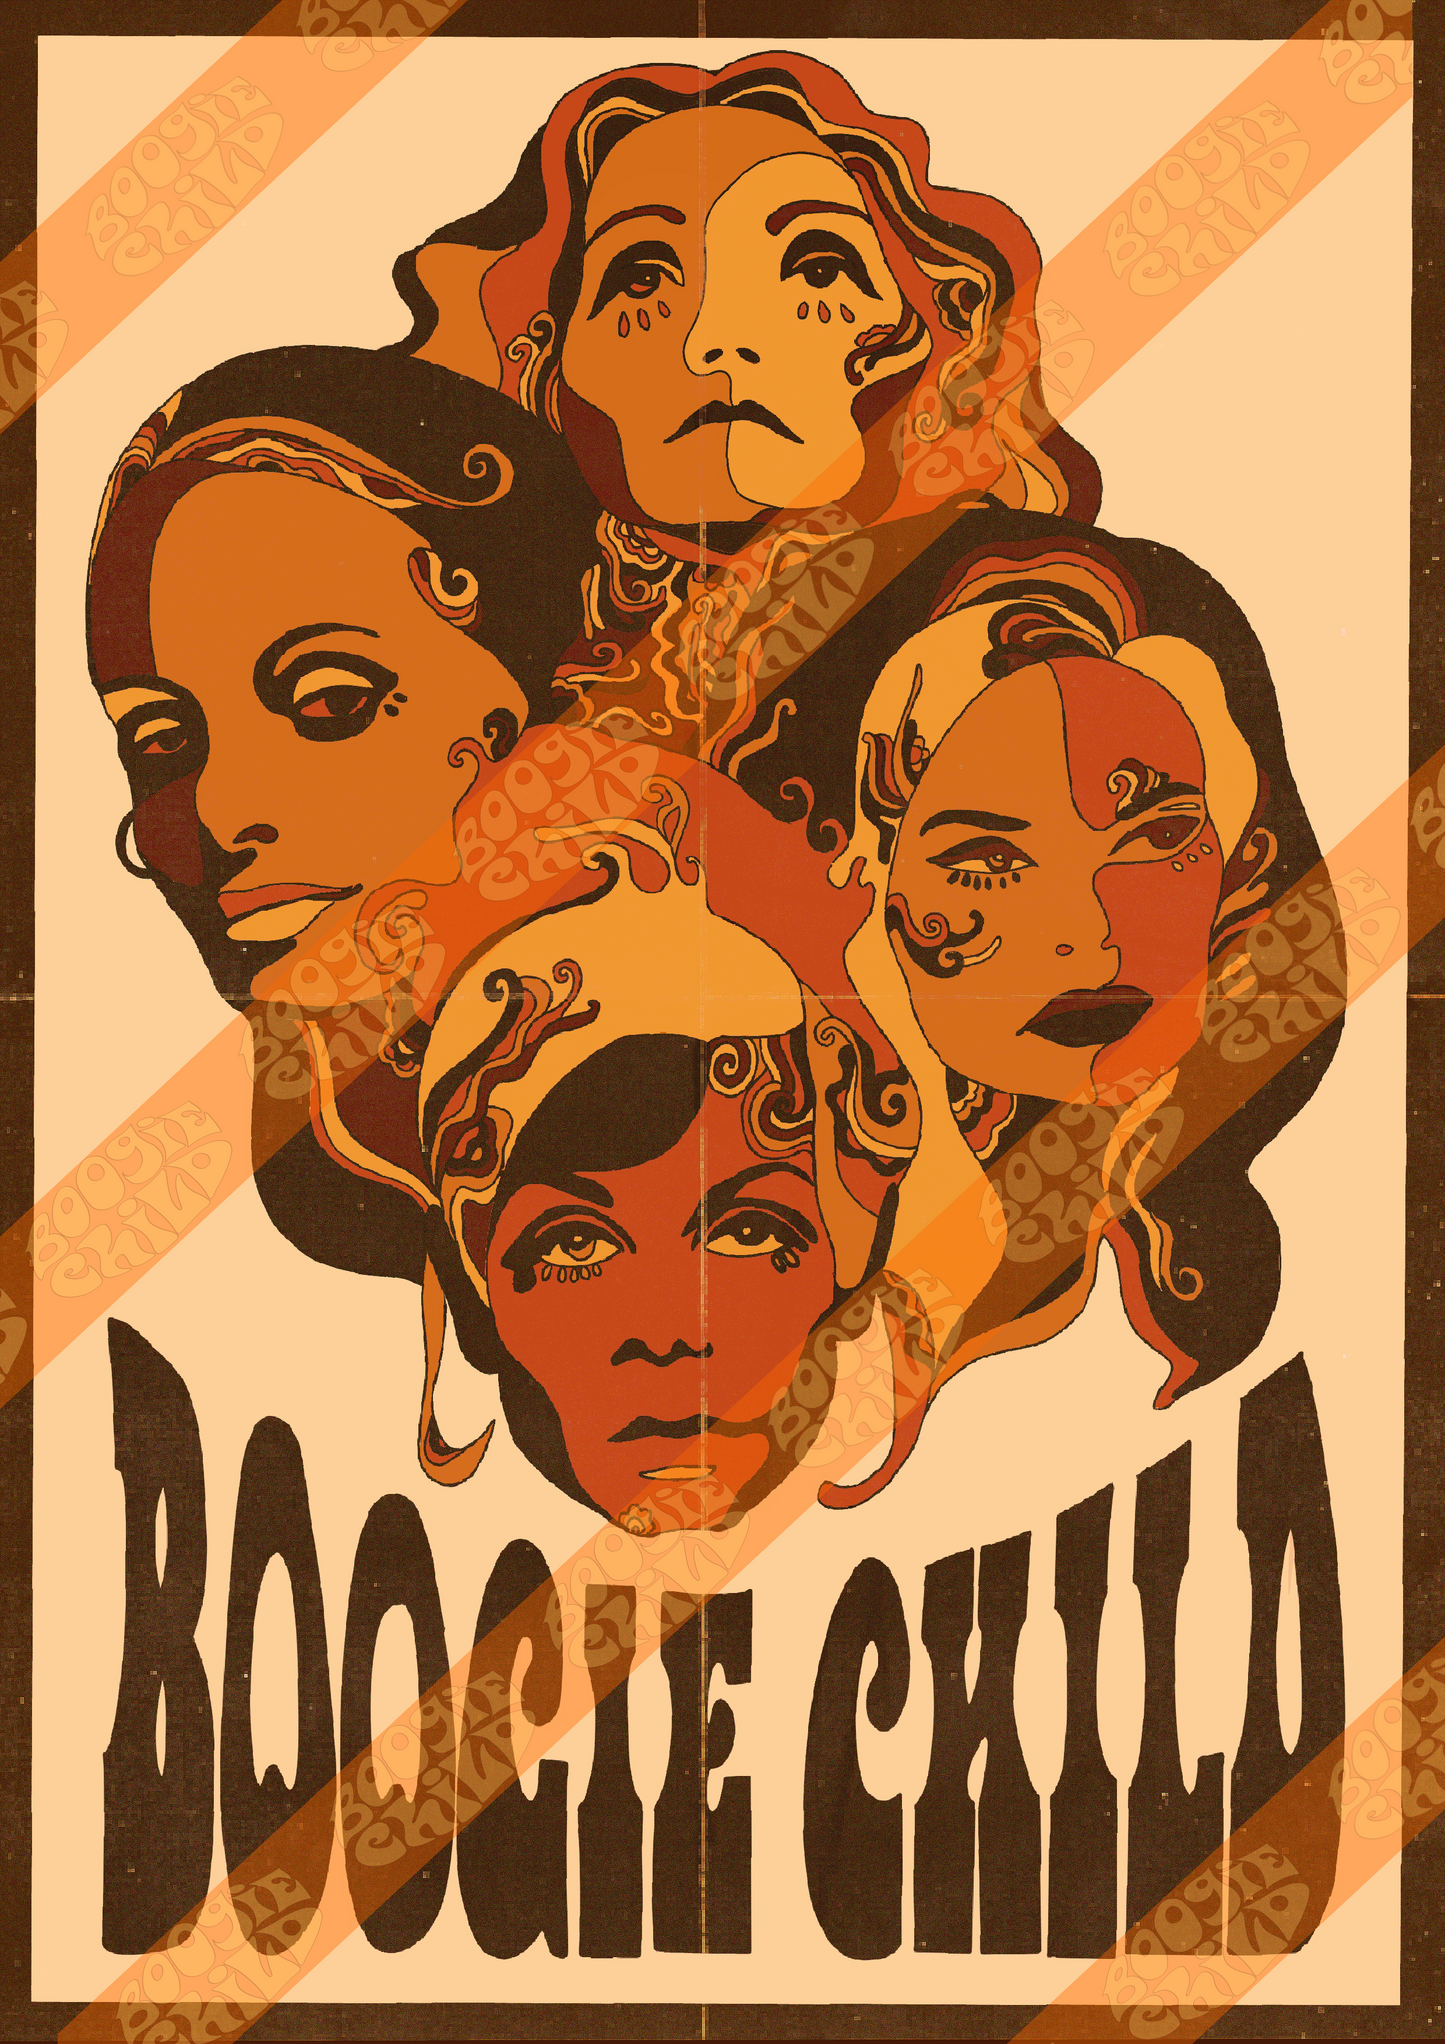 The Boogie Child Print - Size A3 / 11.7" × 16.5"